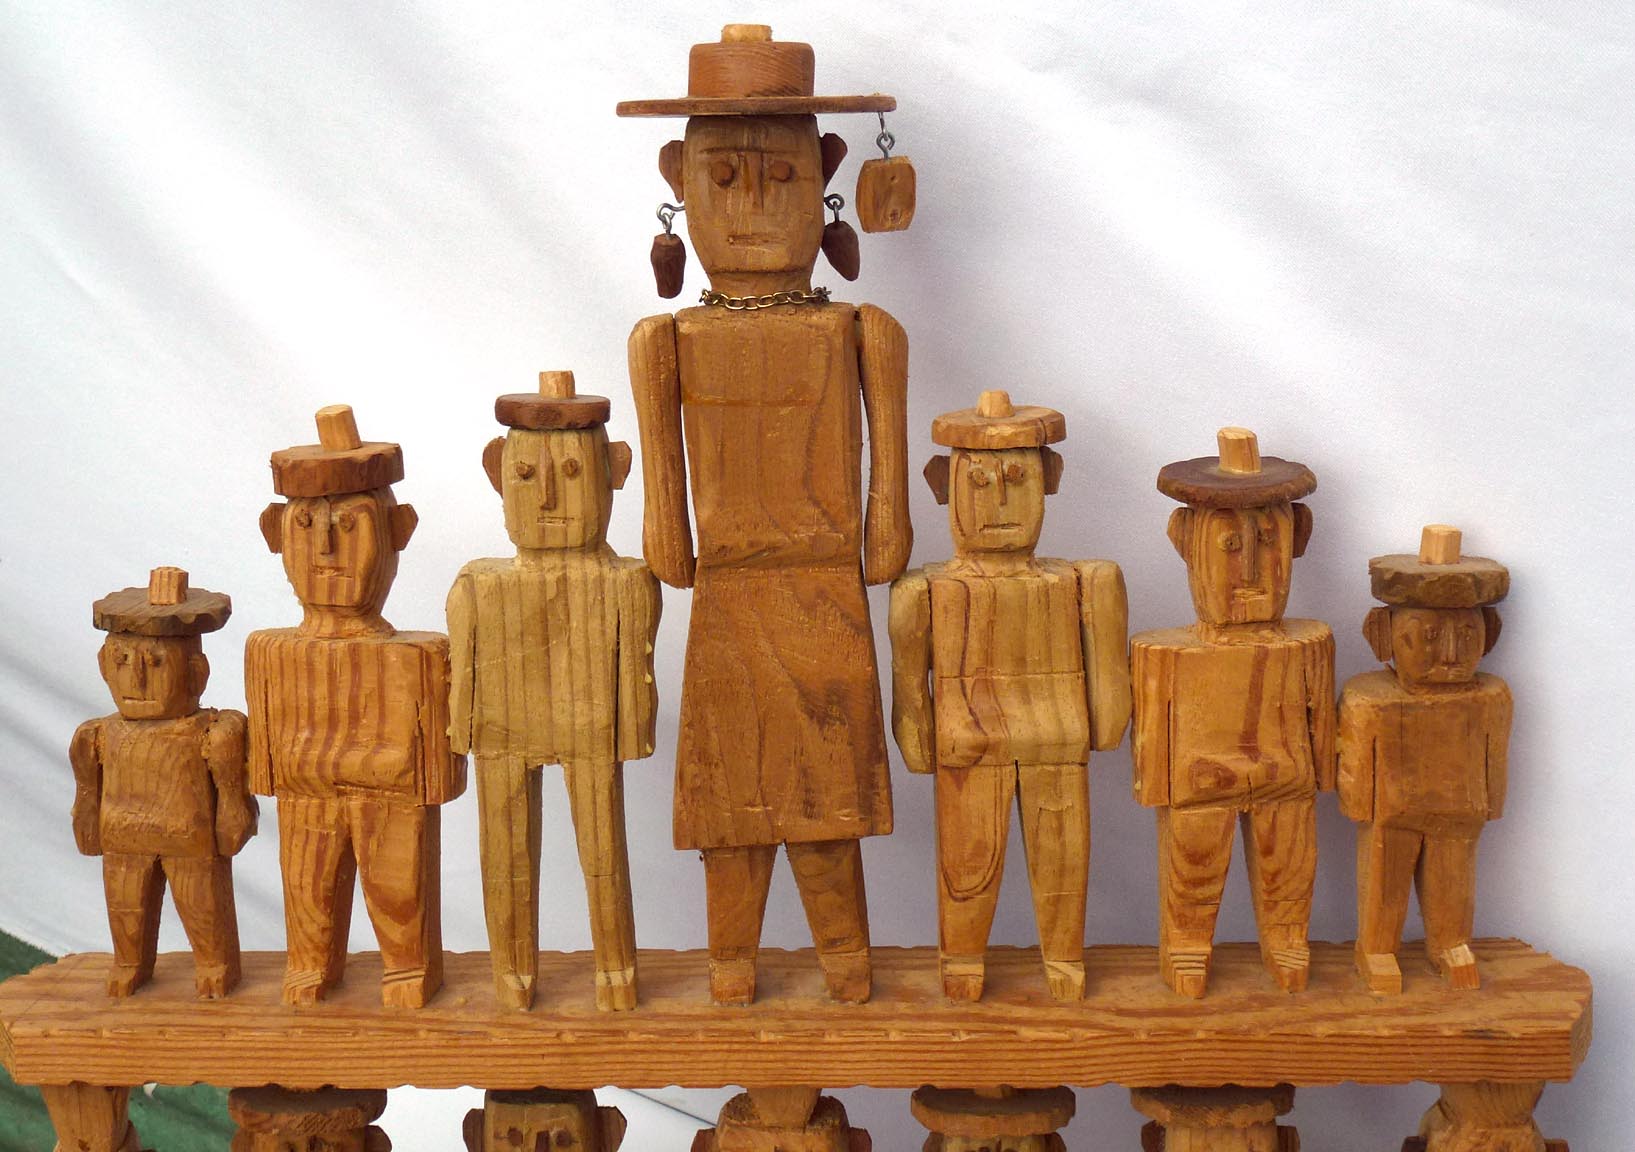 14 primitively carved people